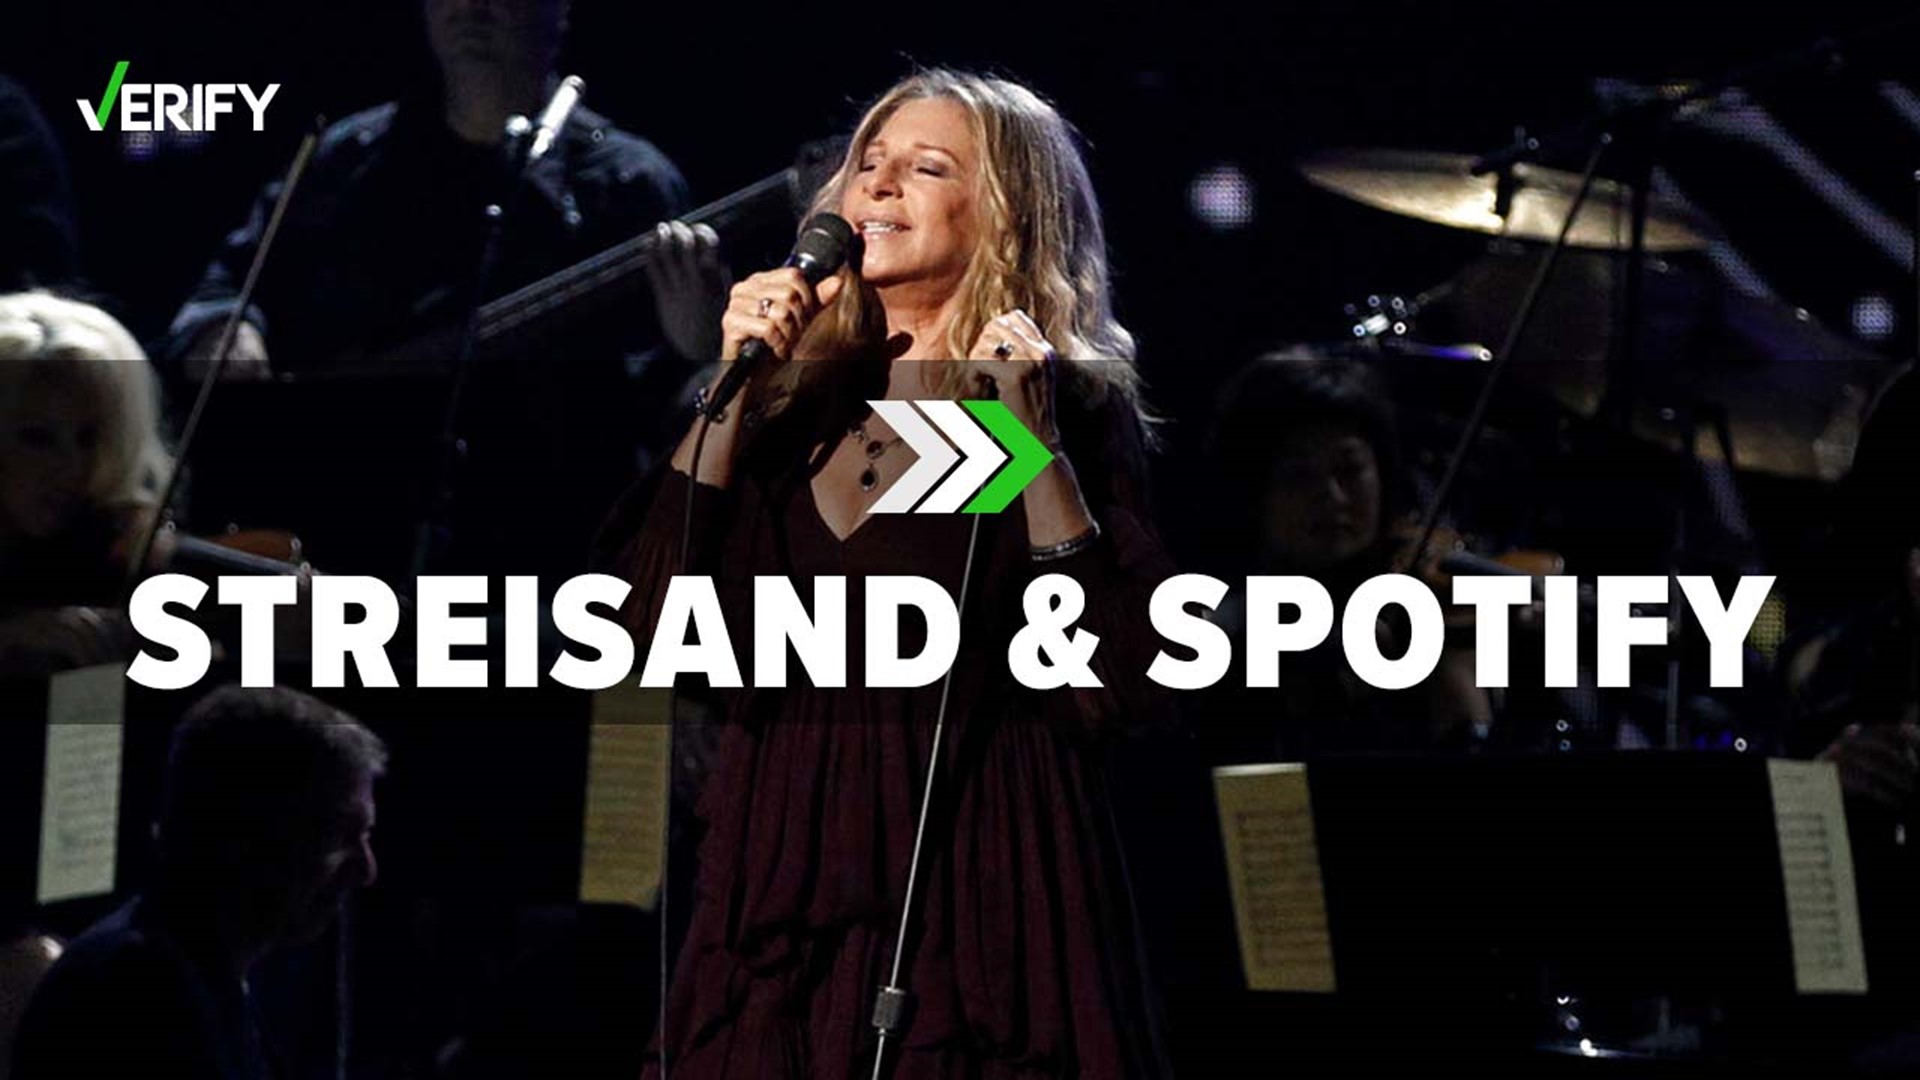 Barbra Streisand said “someone impersonating her” released a statement about the Spotify situation. Her music is still available to stream on the platform.